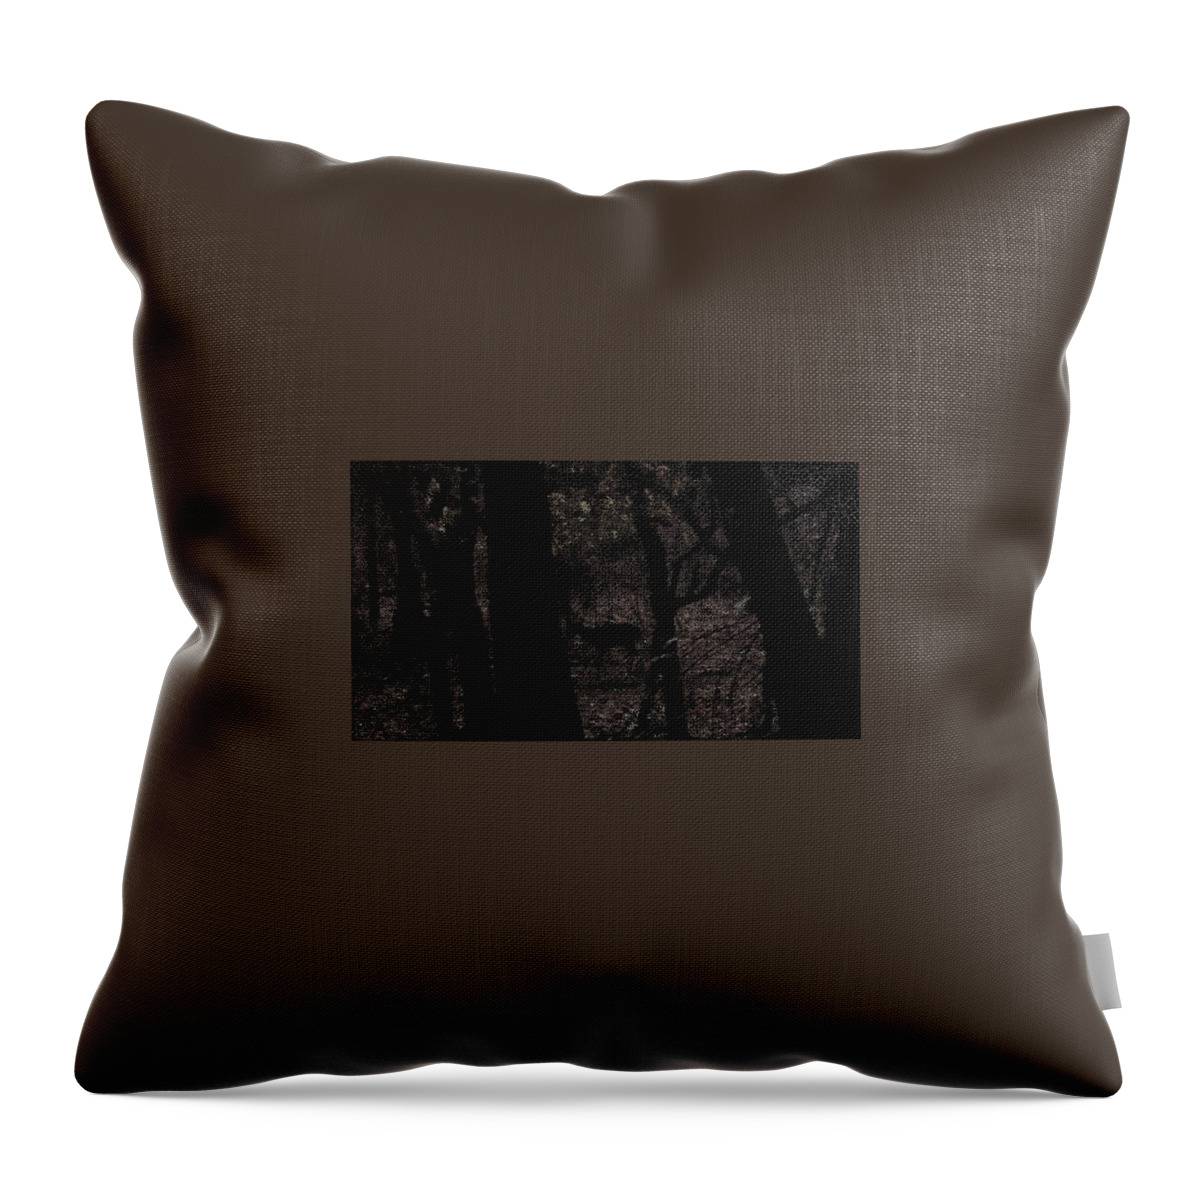 Vorotrans Throw Pillow featuring the digital art Surrounded by Stephane Poirier